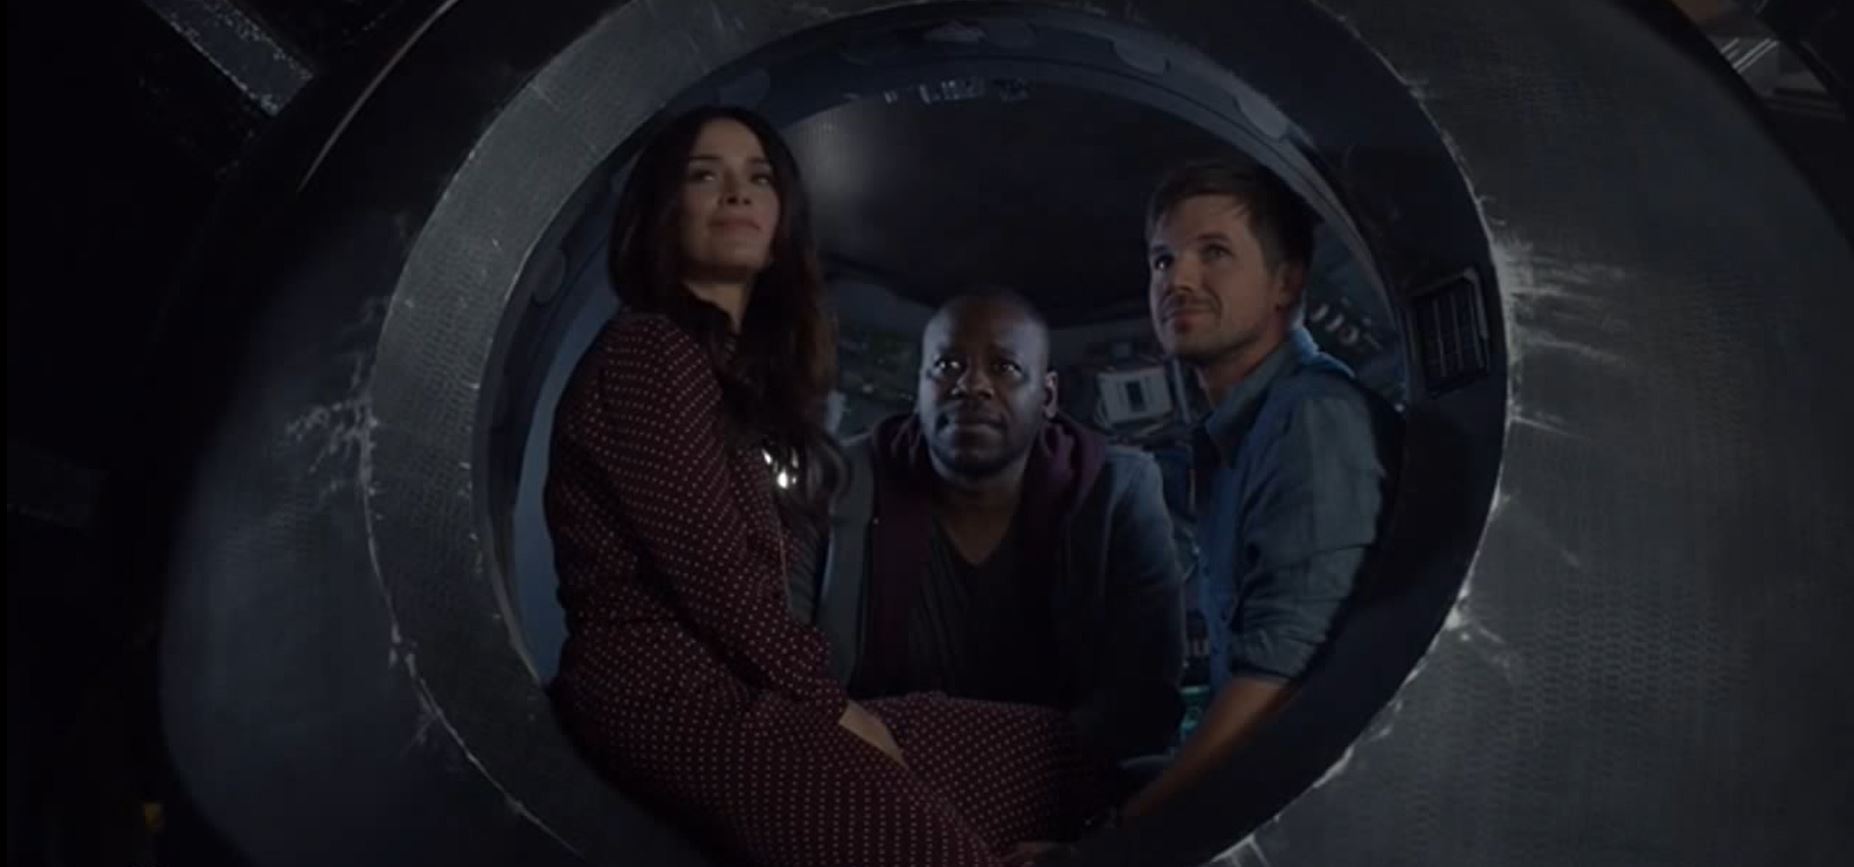 Abigail Spencer as Lucy, Malcolm Barrett as Rufus, and Matt Lanter as Wyatt in Timeless 2x12. Courtesy of NBC.